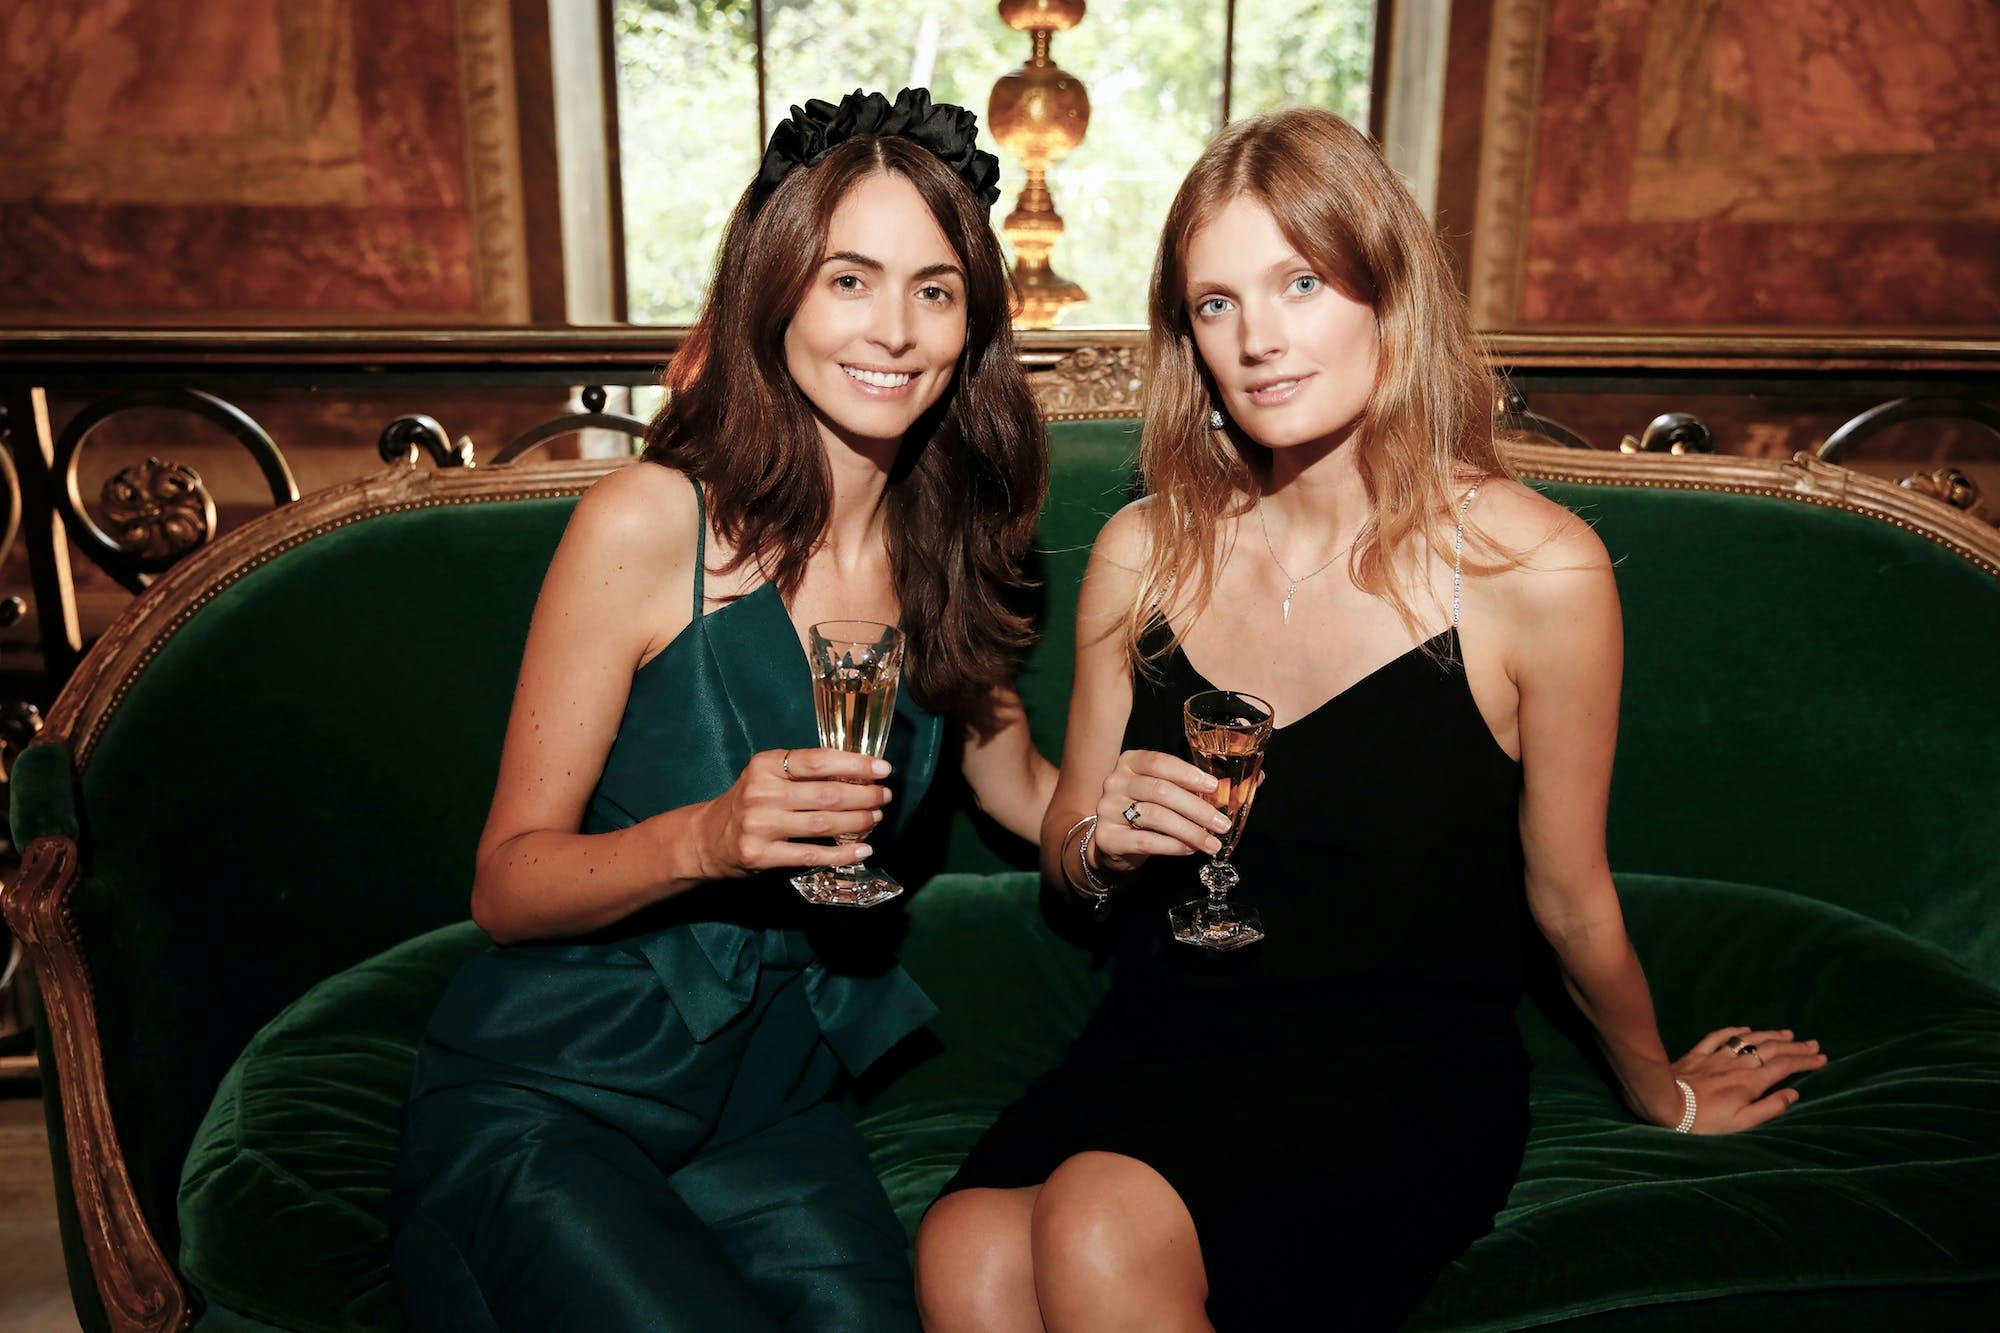 Two women in dresses sitting on a coach holding champagne glasses